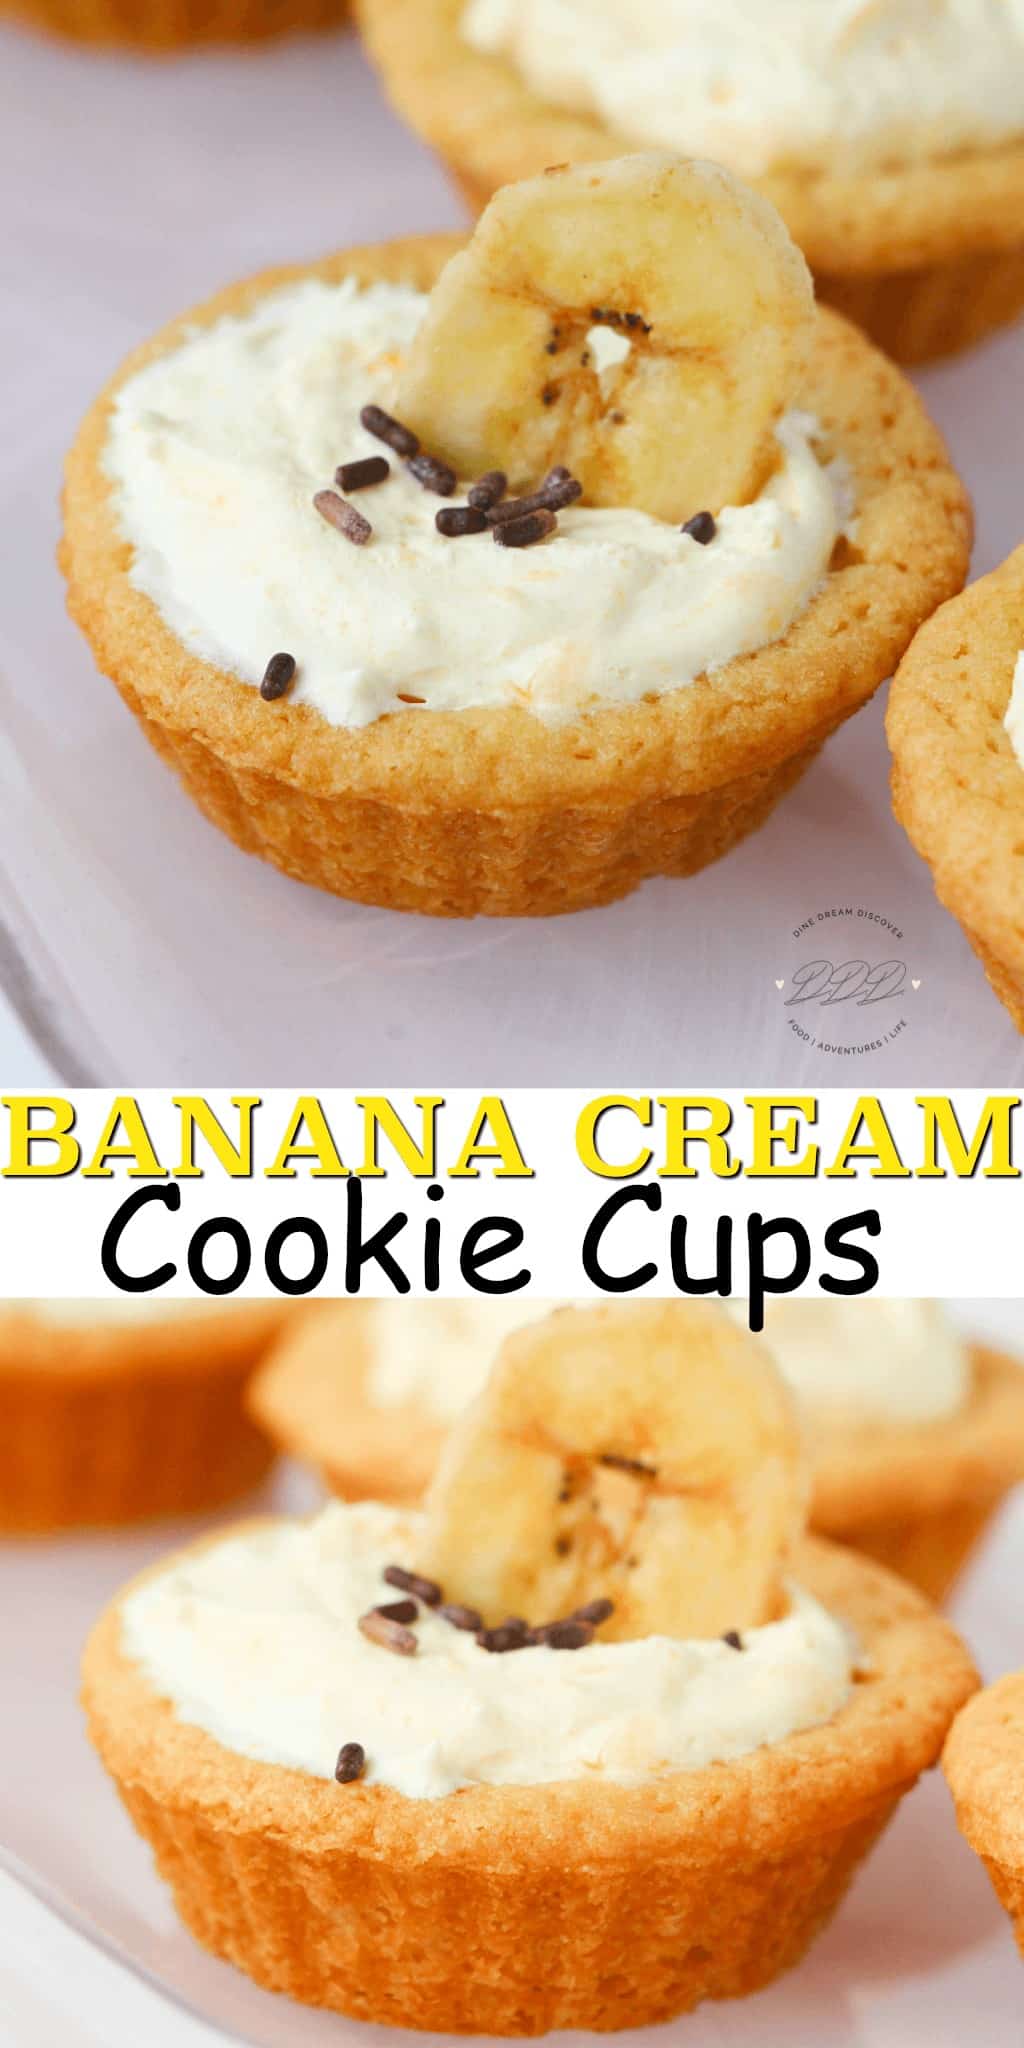 Mini cream pie recipes are always fun but a blend of banana cream and sugar cookies all rolled into an easy bite sized Banana Cream Pie Cookie Cups recipe makes it even better. 